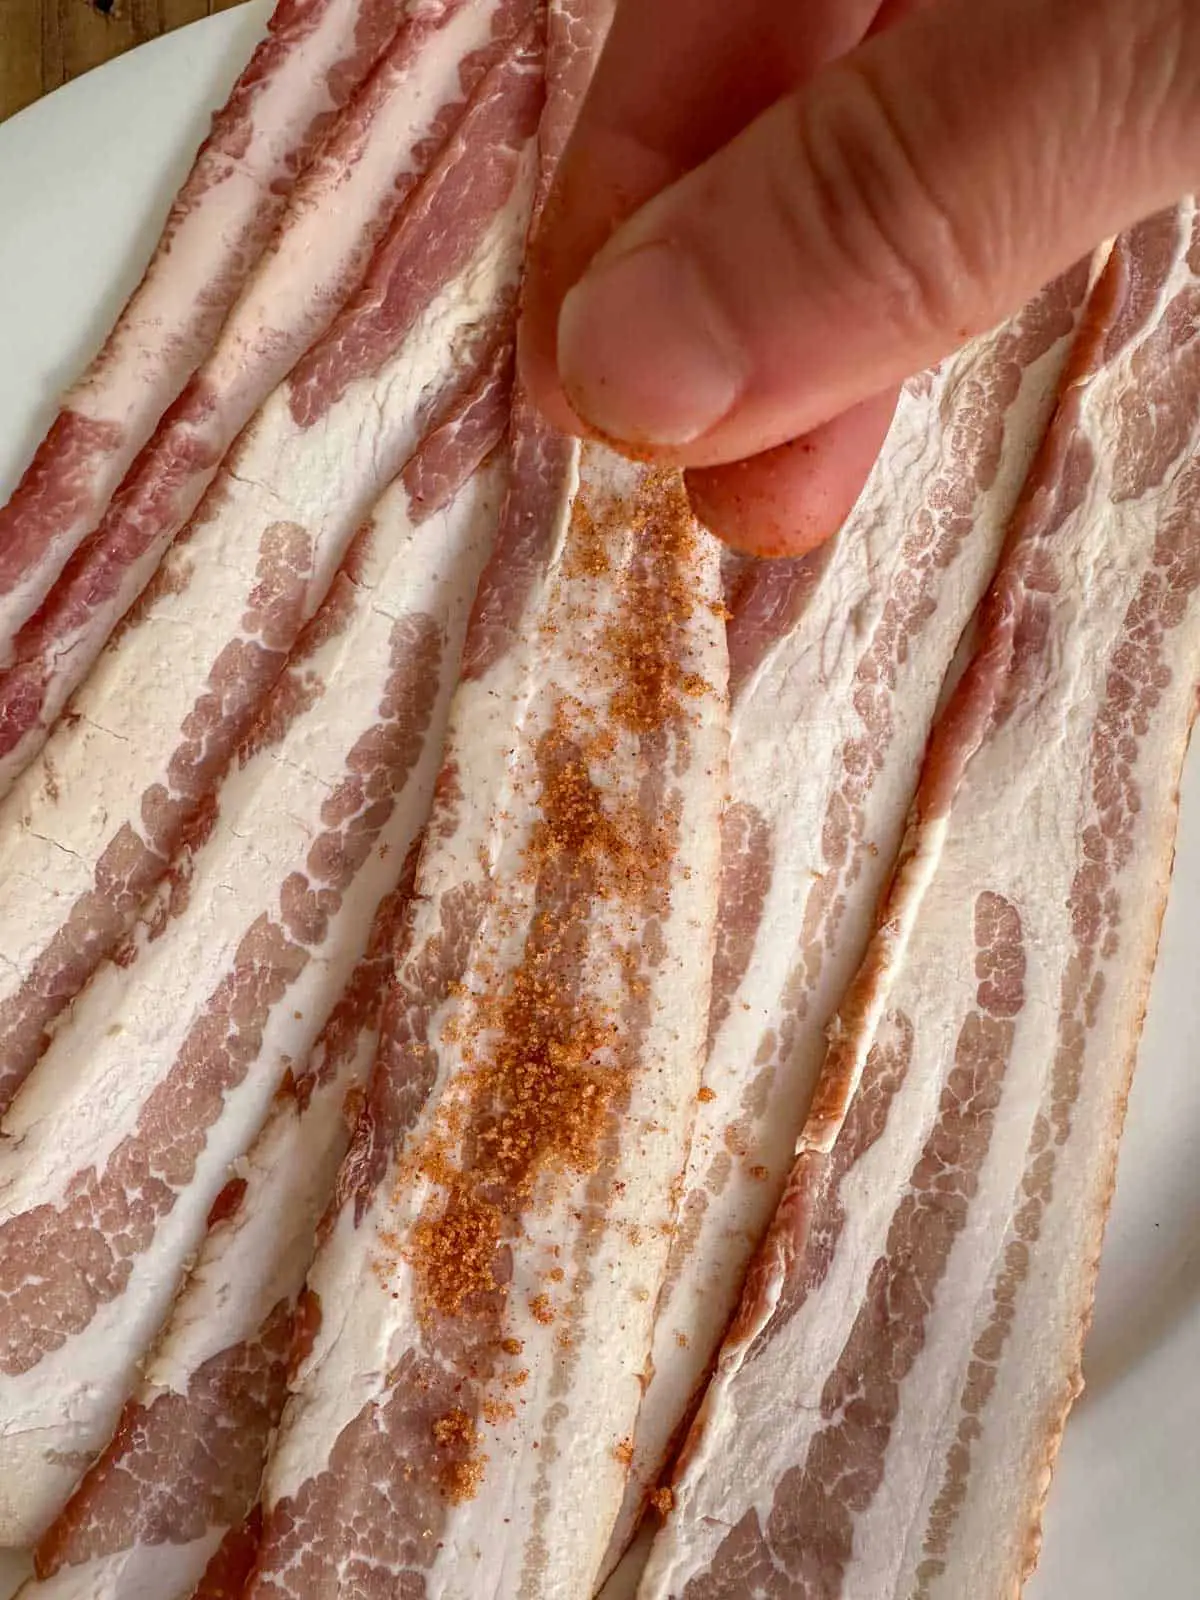 Uncooked bacon on a white plate. There is a person sprinkling a mixture of Scorpion pepper powder and brown sugar onto the bacon.